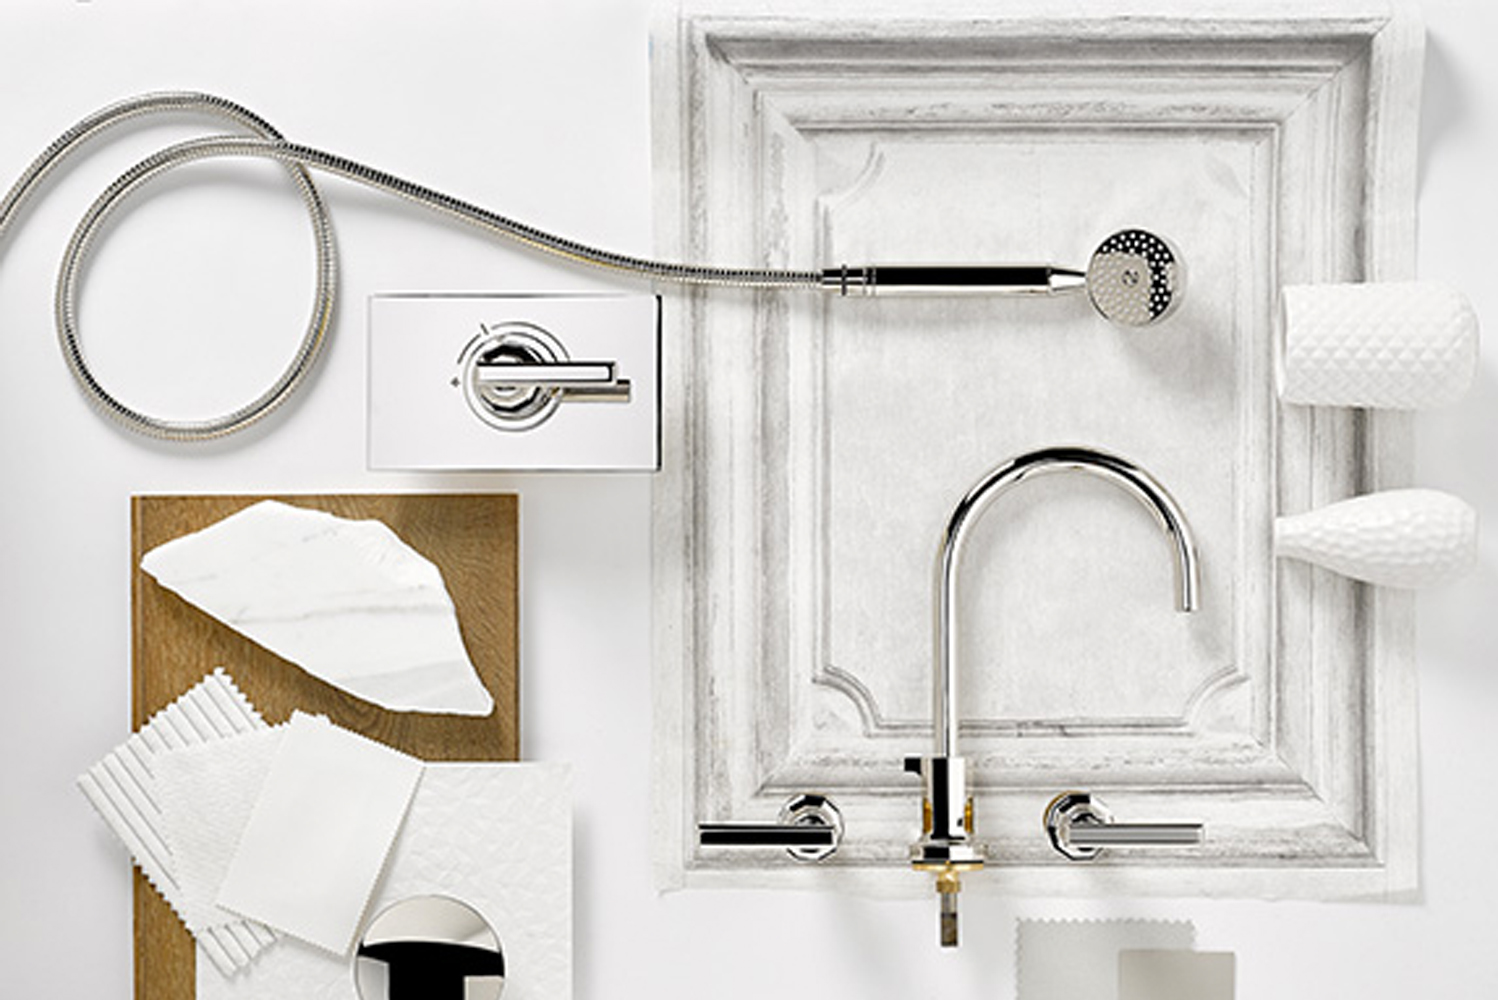 THG Paris introduced a new 2018 collection from French design duo Gilles  Boissier the Les Ondes collection of faucets